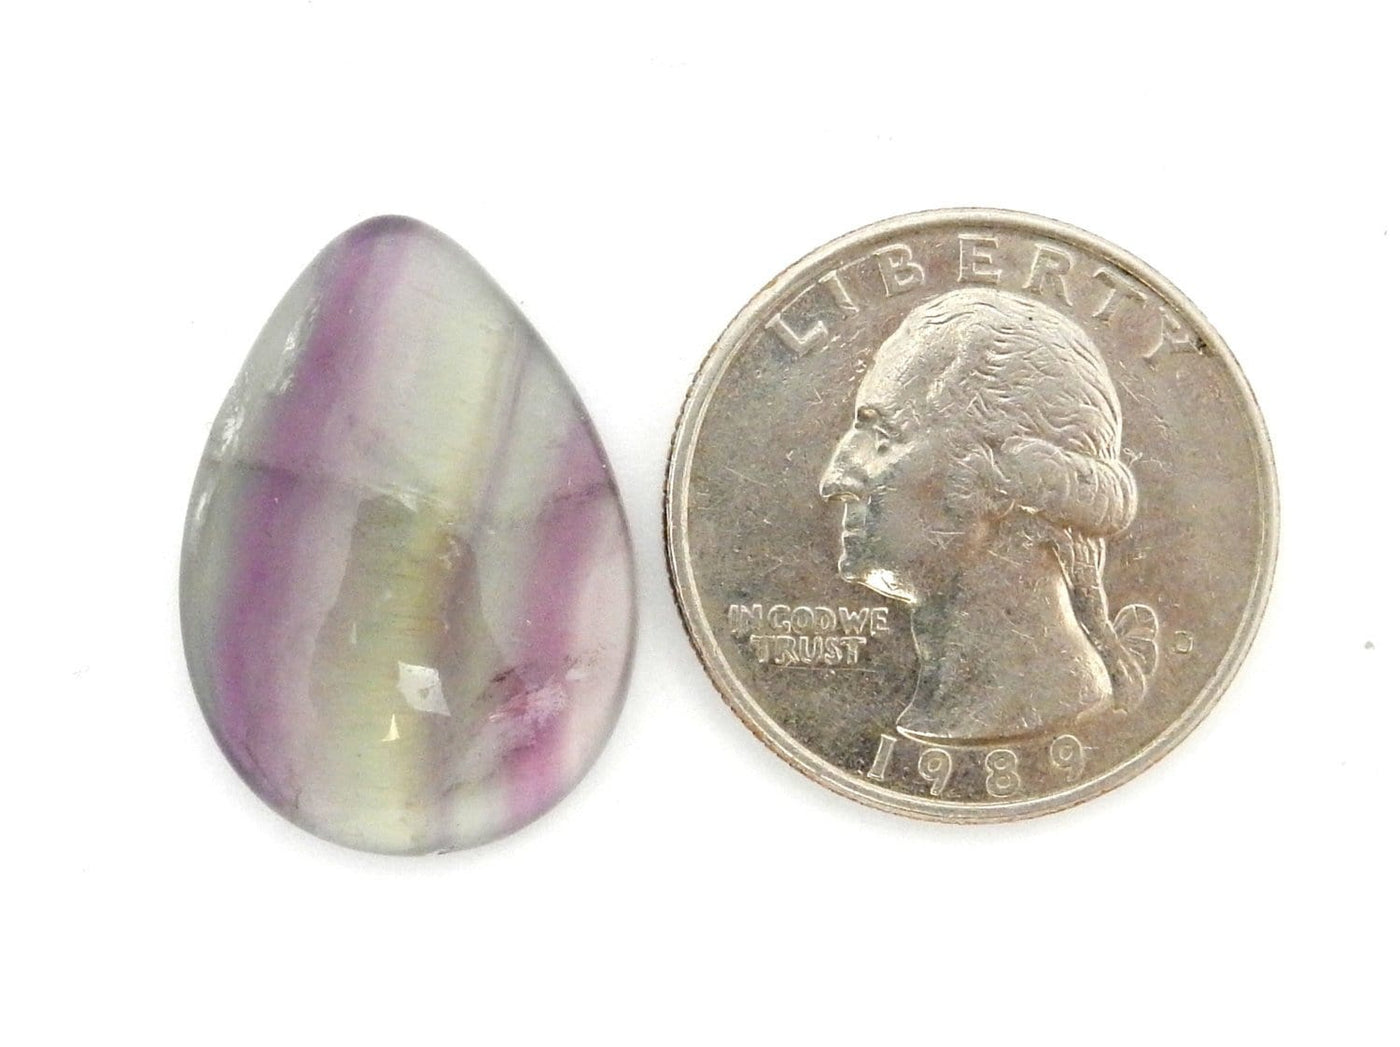 Teardrop Shaped Fluorite Cabochon next to a quarter for sizing, Approximate sizing is 25mm x 18 mm